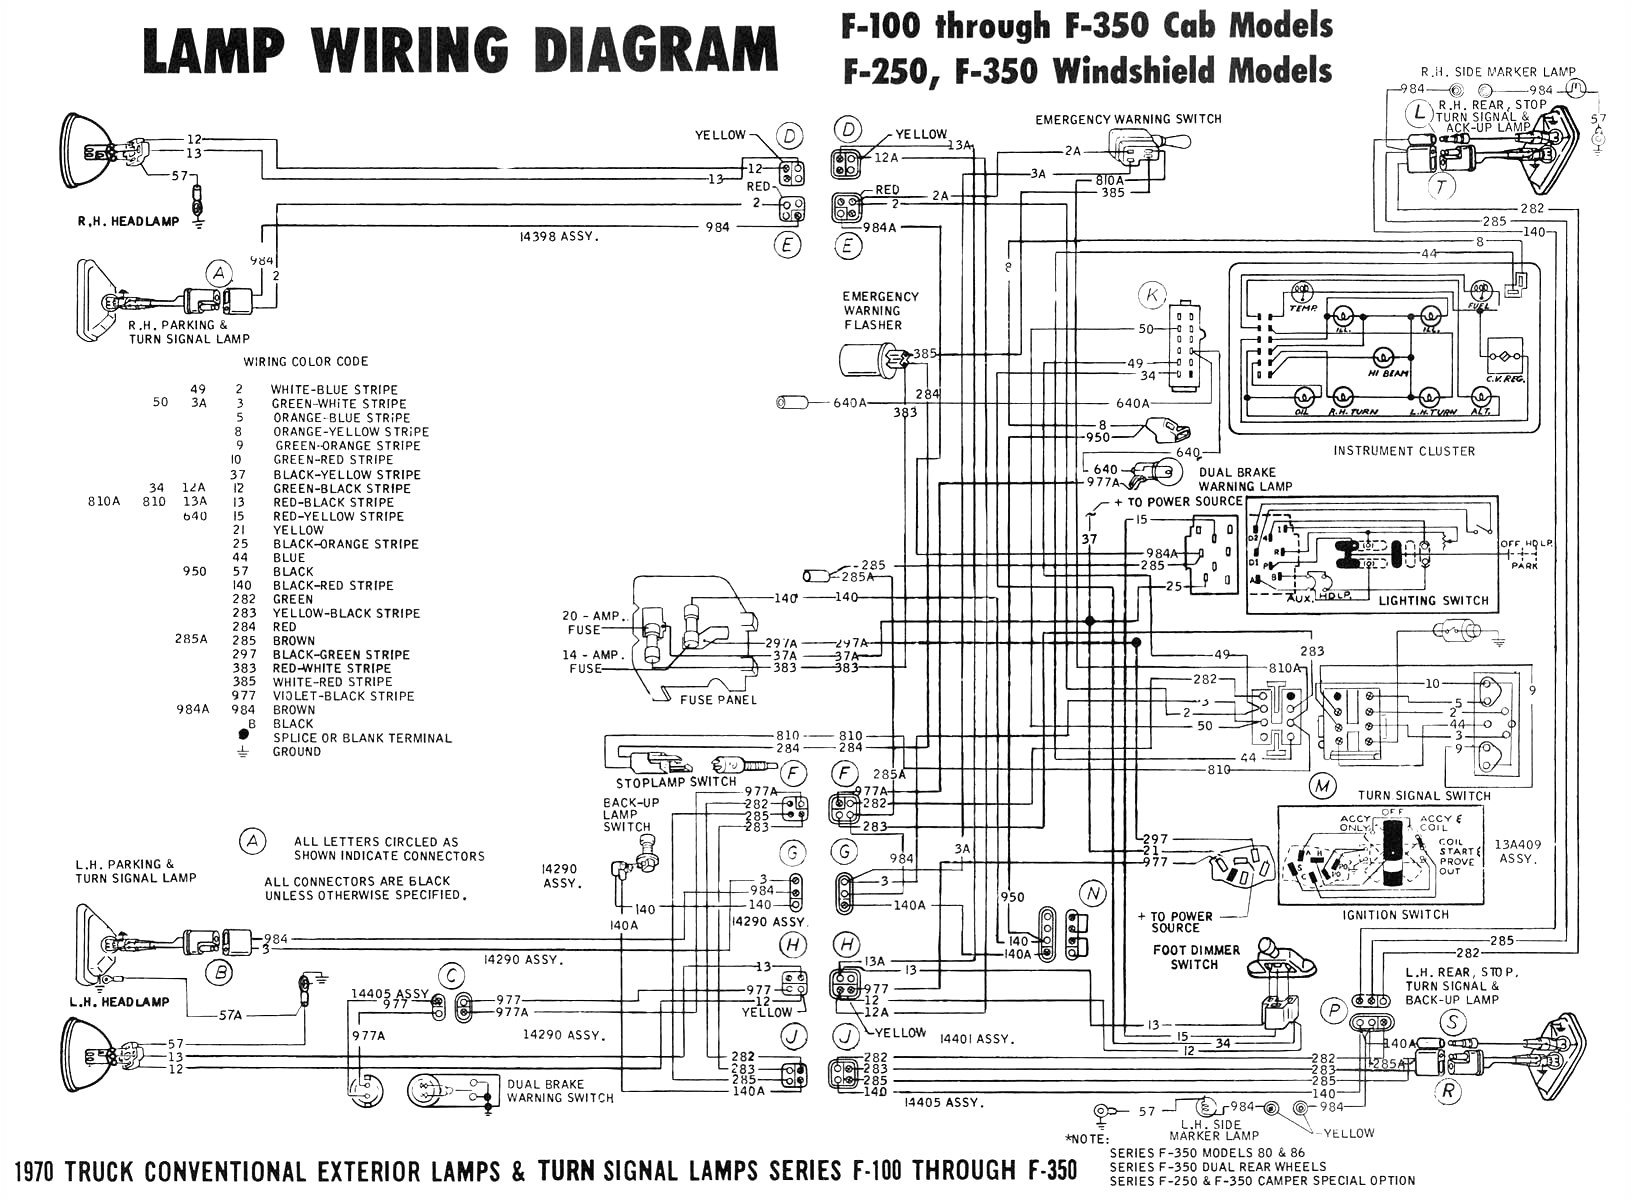 f250 cooling fan diagram online manuual of wiring diagram f250 cooling fan diagram